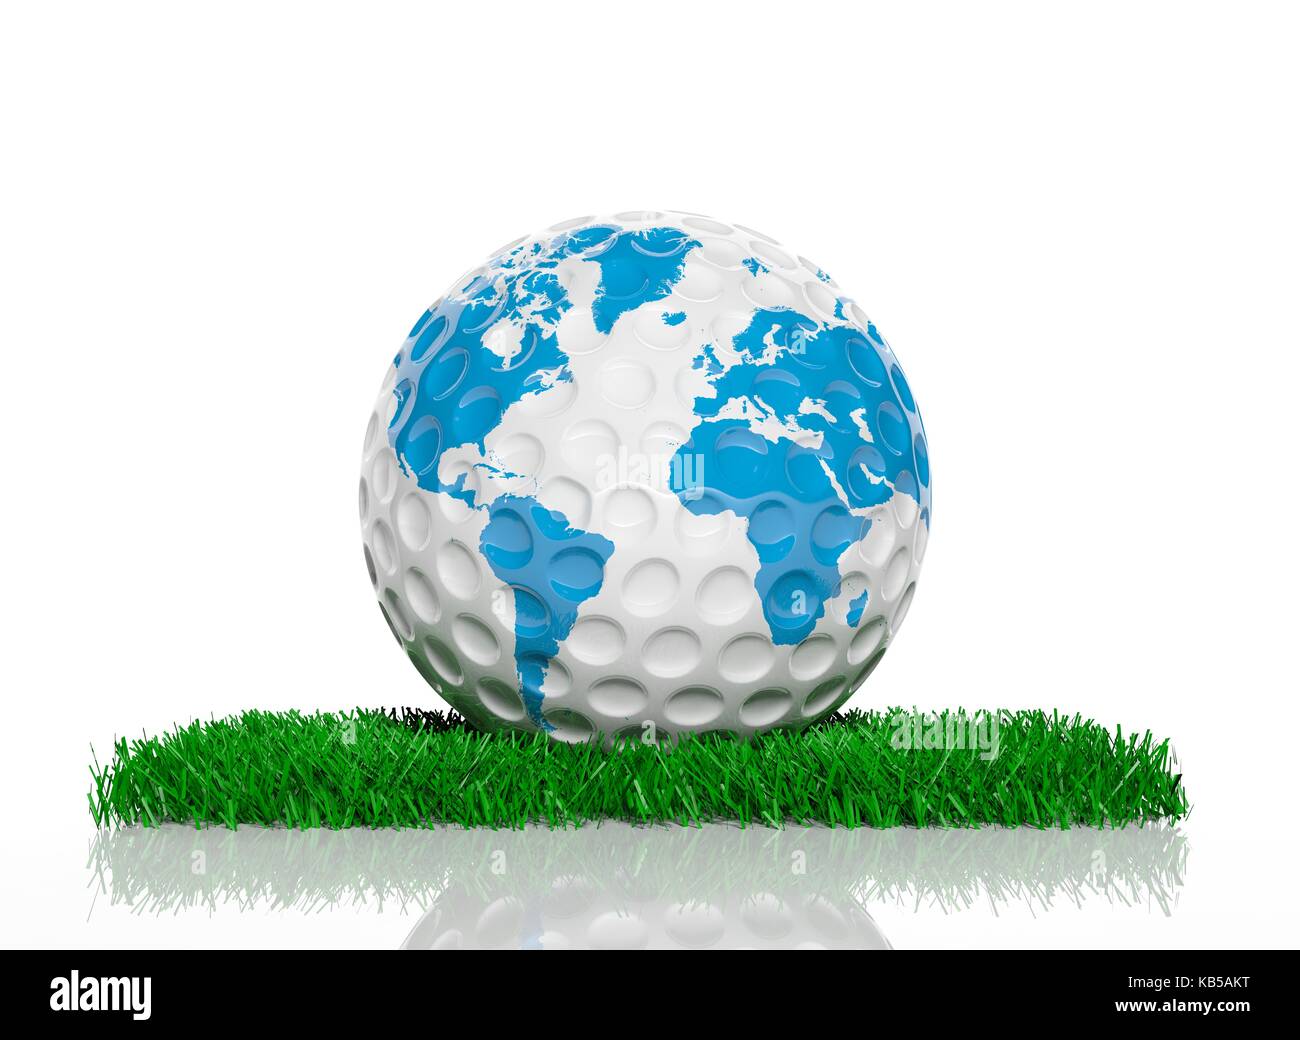 Golf ball with world map on green grass Stock Photo - Alamy